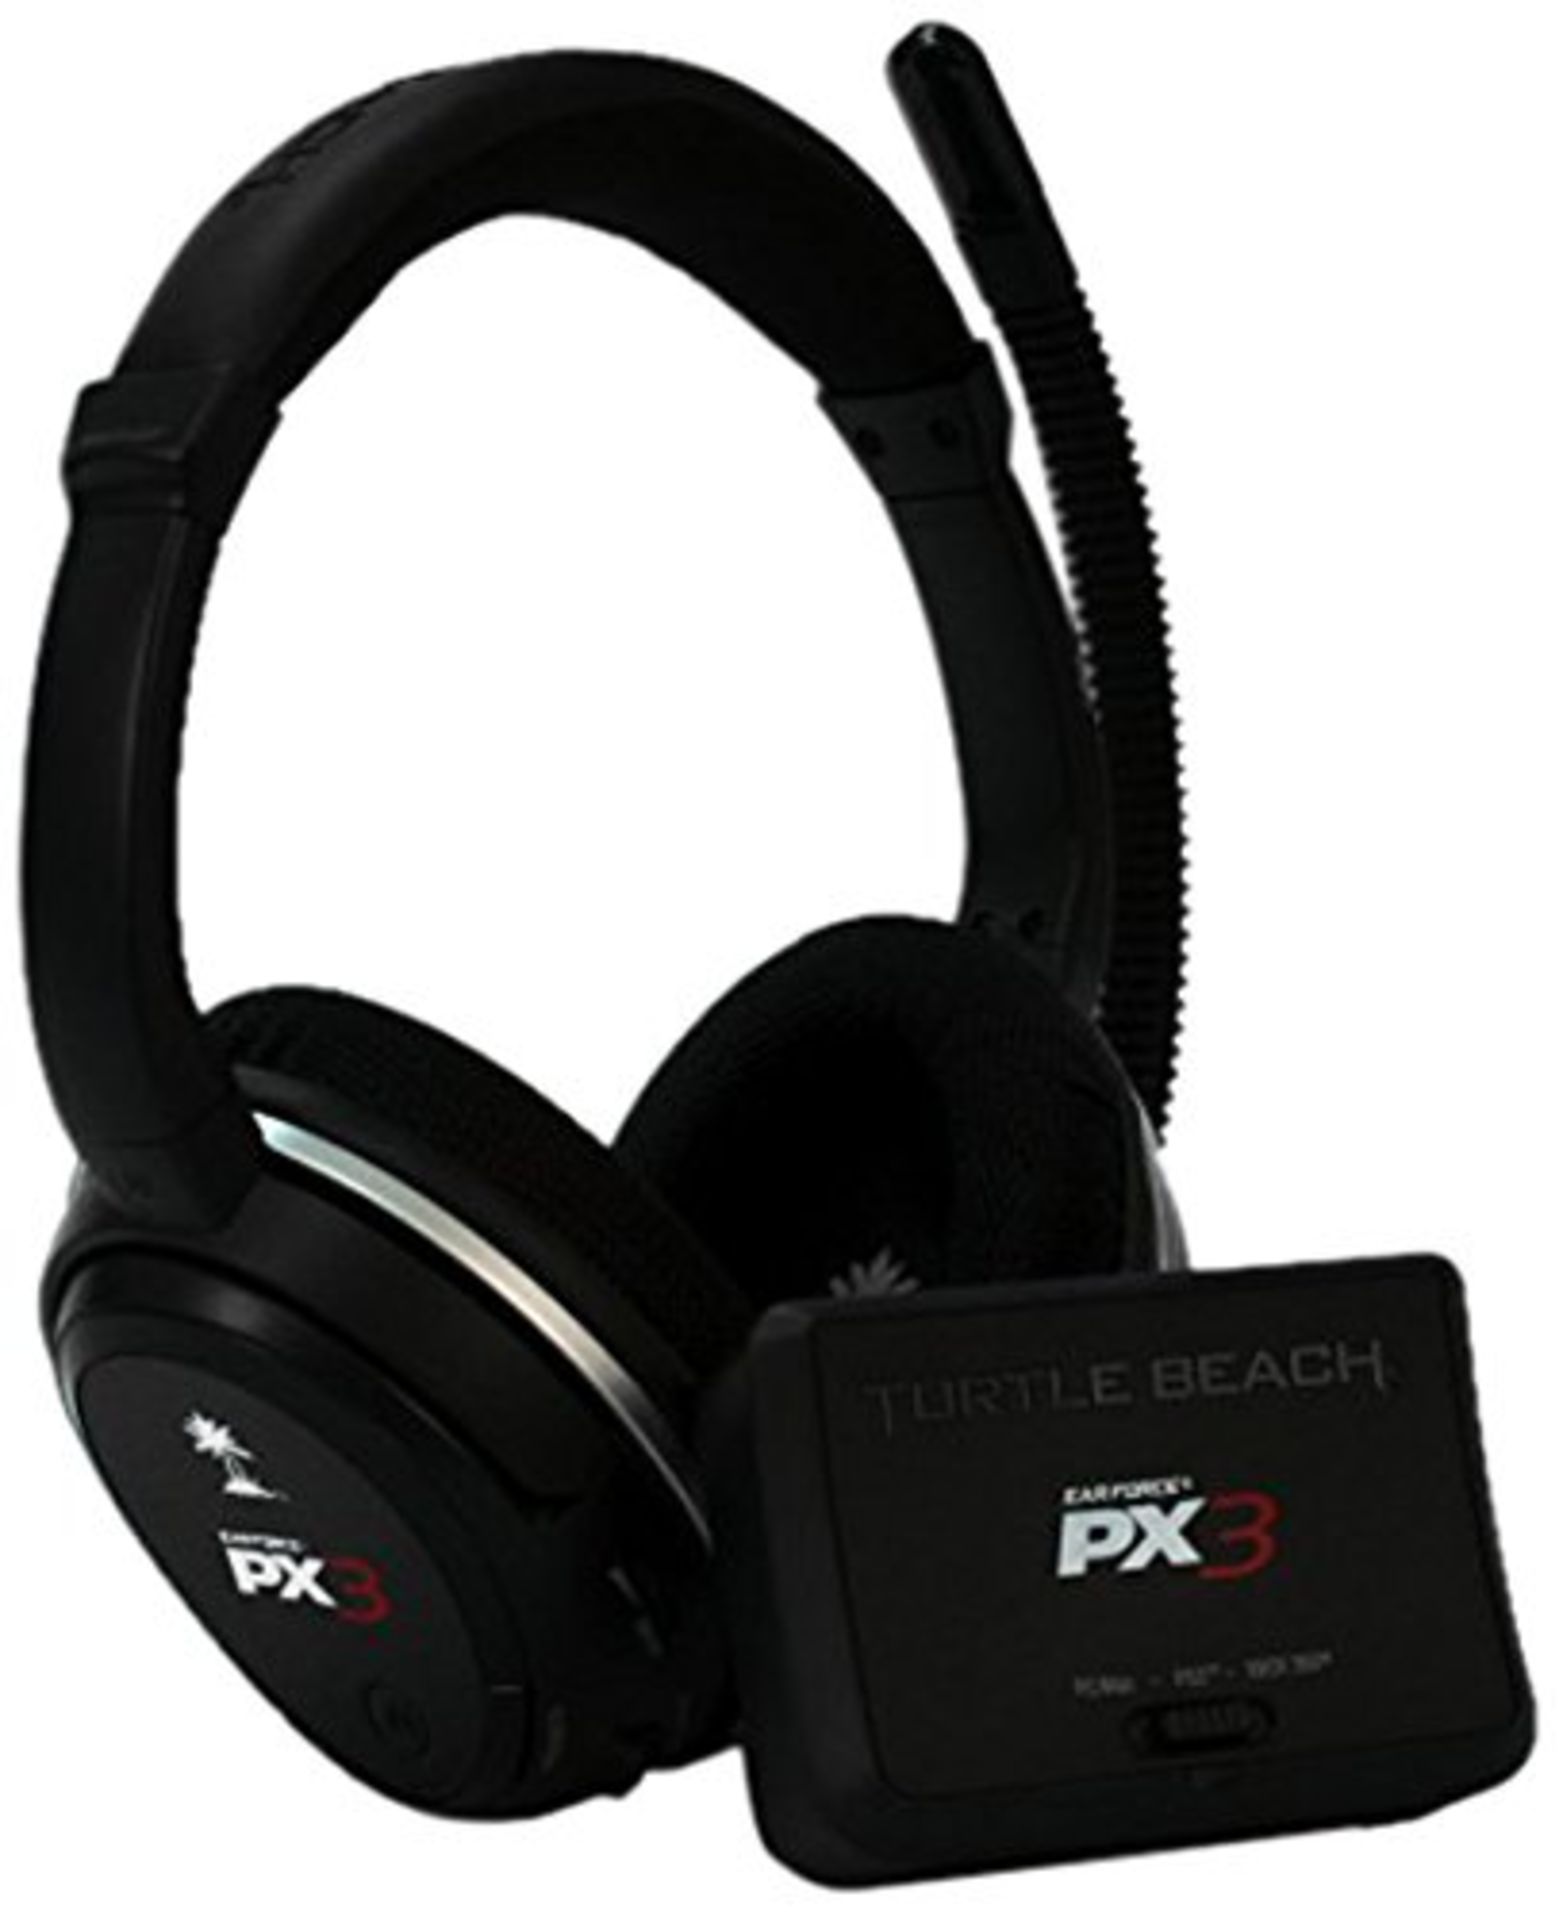 V *TRADE QTY* Grade A Turtle Beach PX3 Programmable Wireless Gaming Headset For PS3 Xbox 360 and